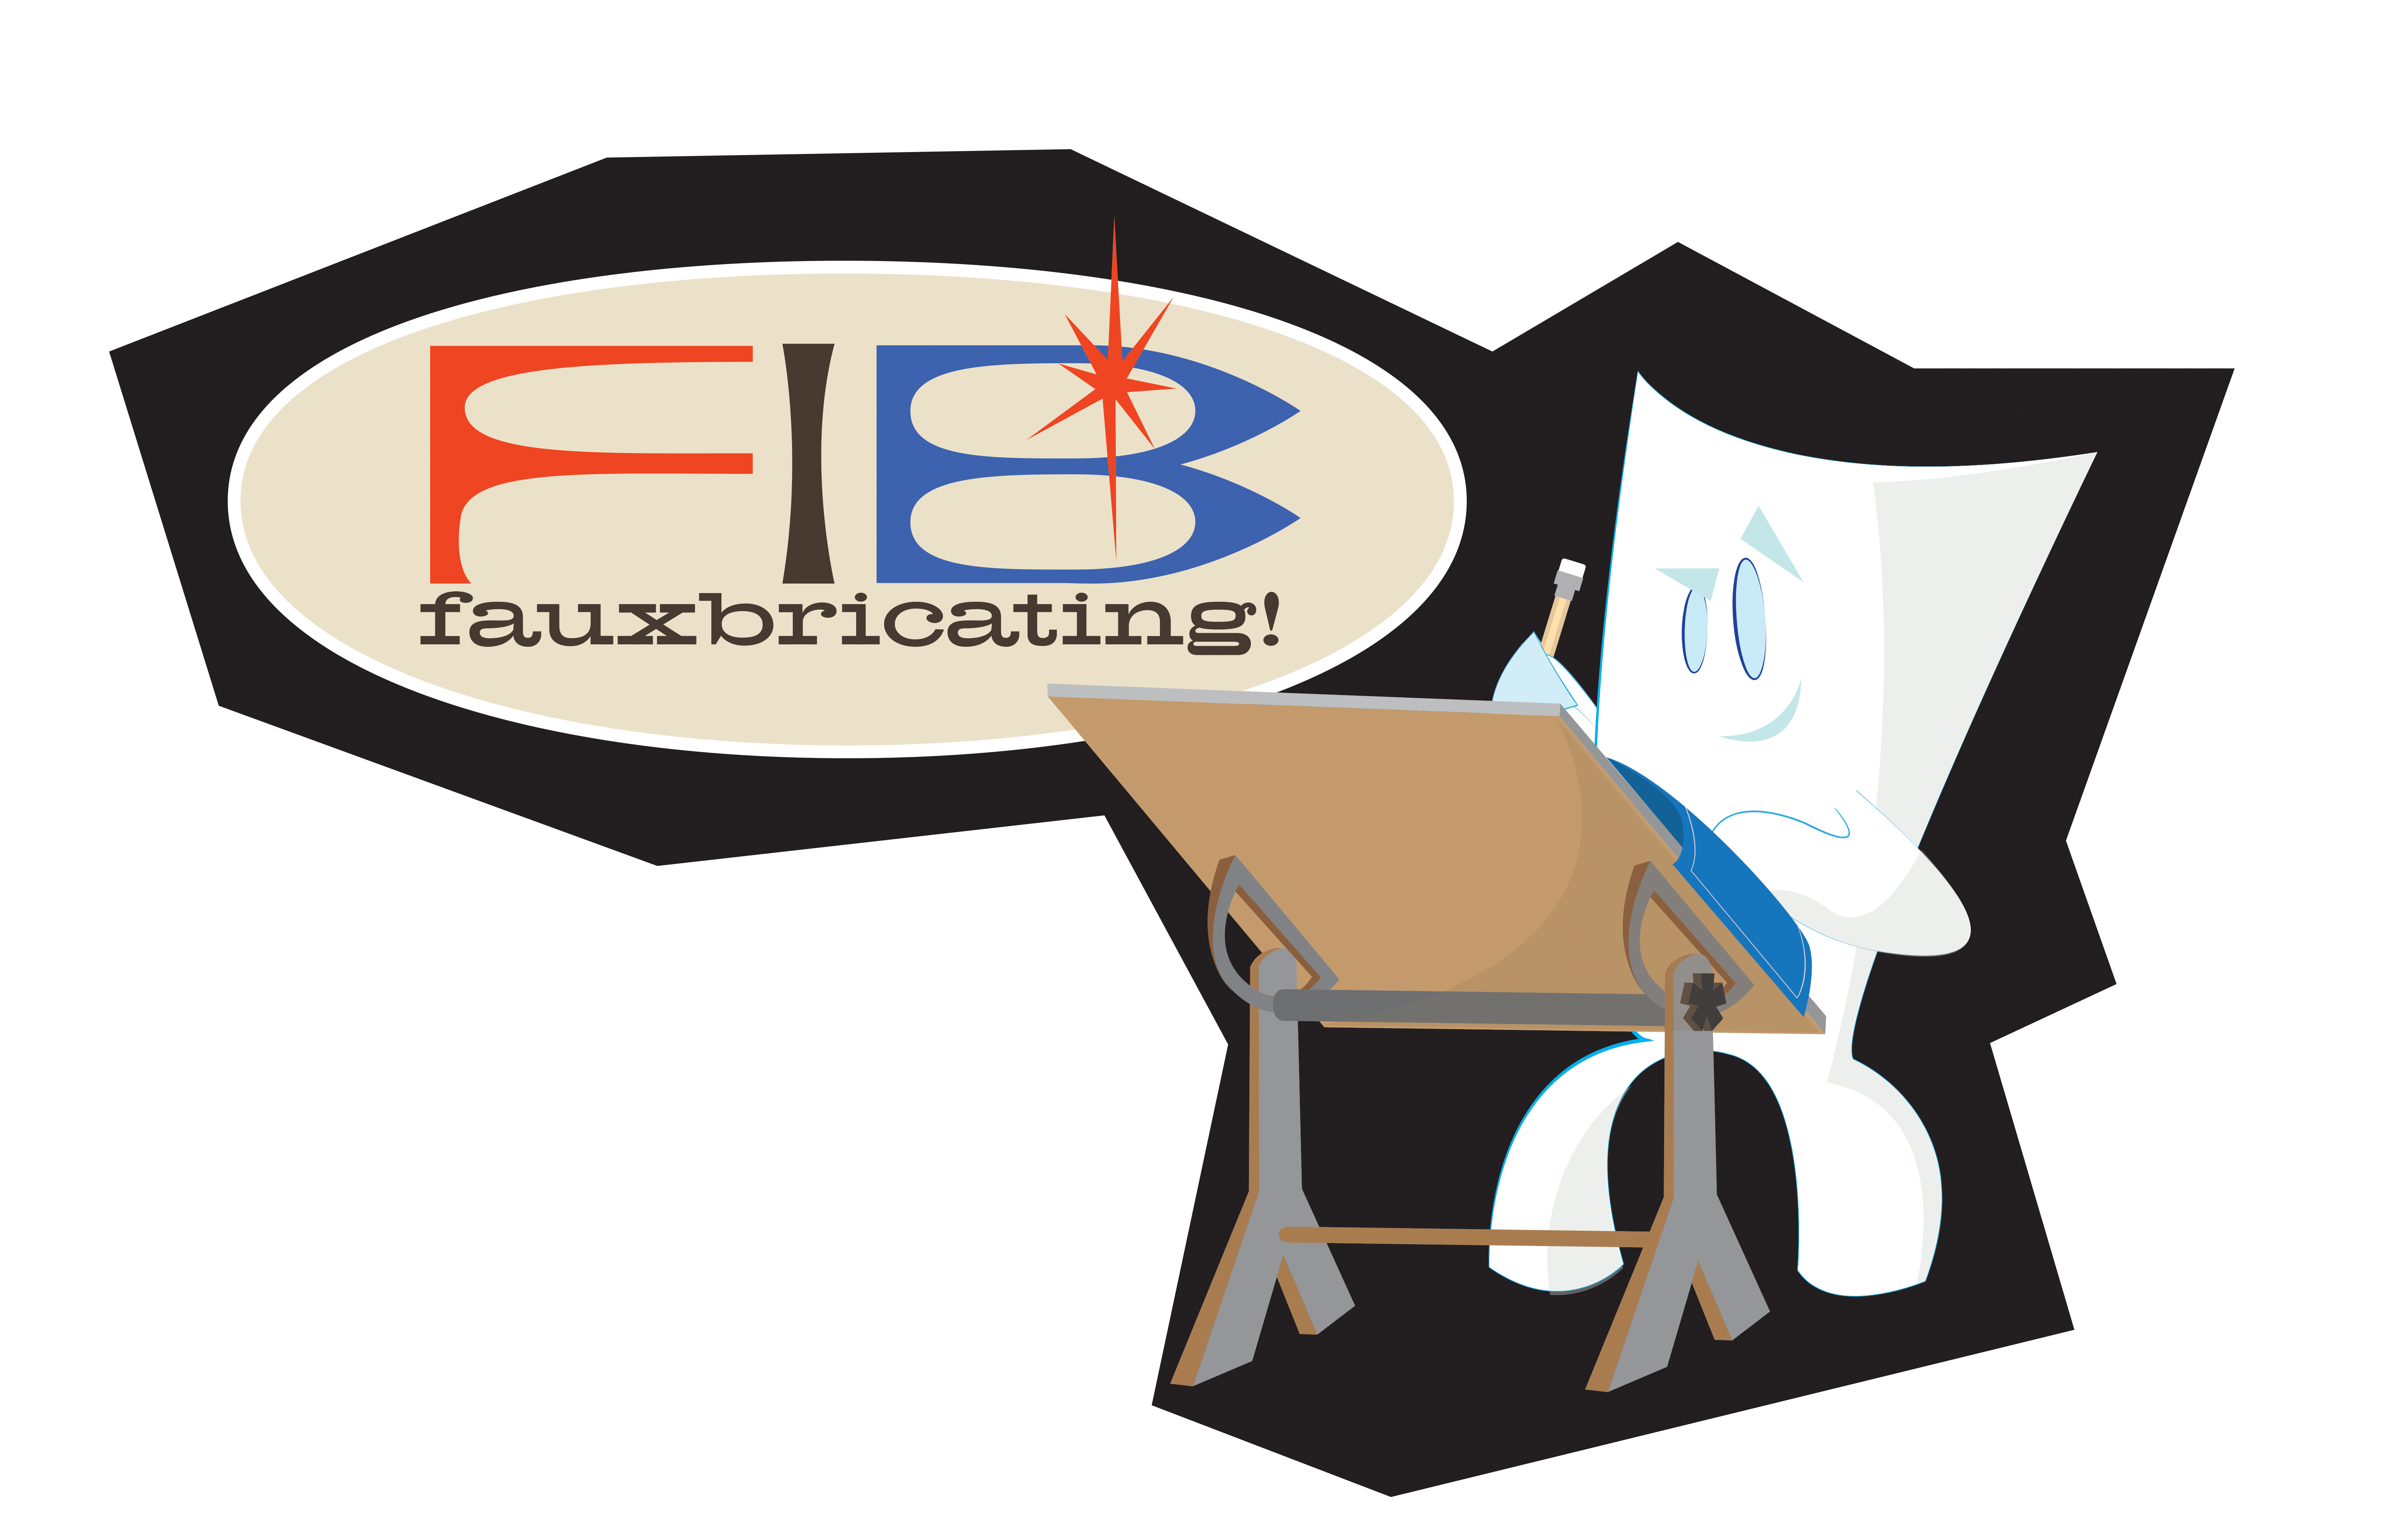 PDF of the FIB sign, with the logo that says "FIB Fauxbricating!" with an illustration of Blank drawing.